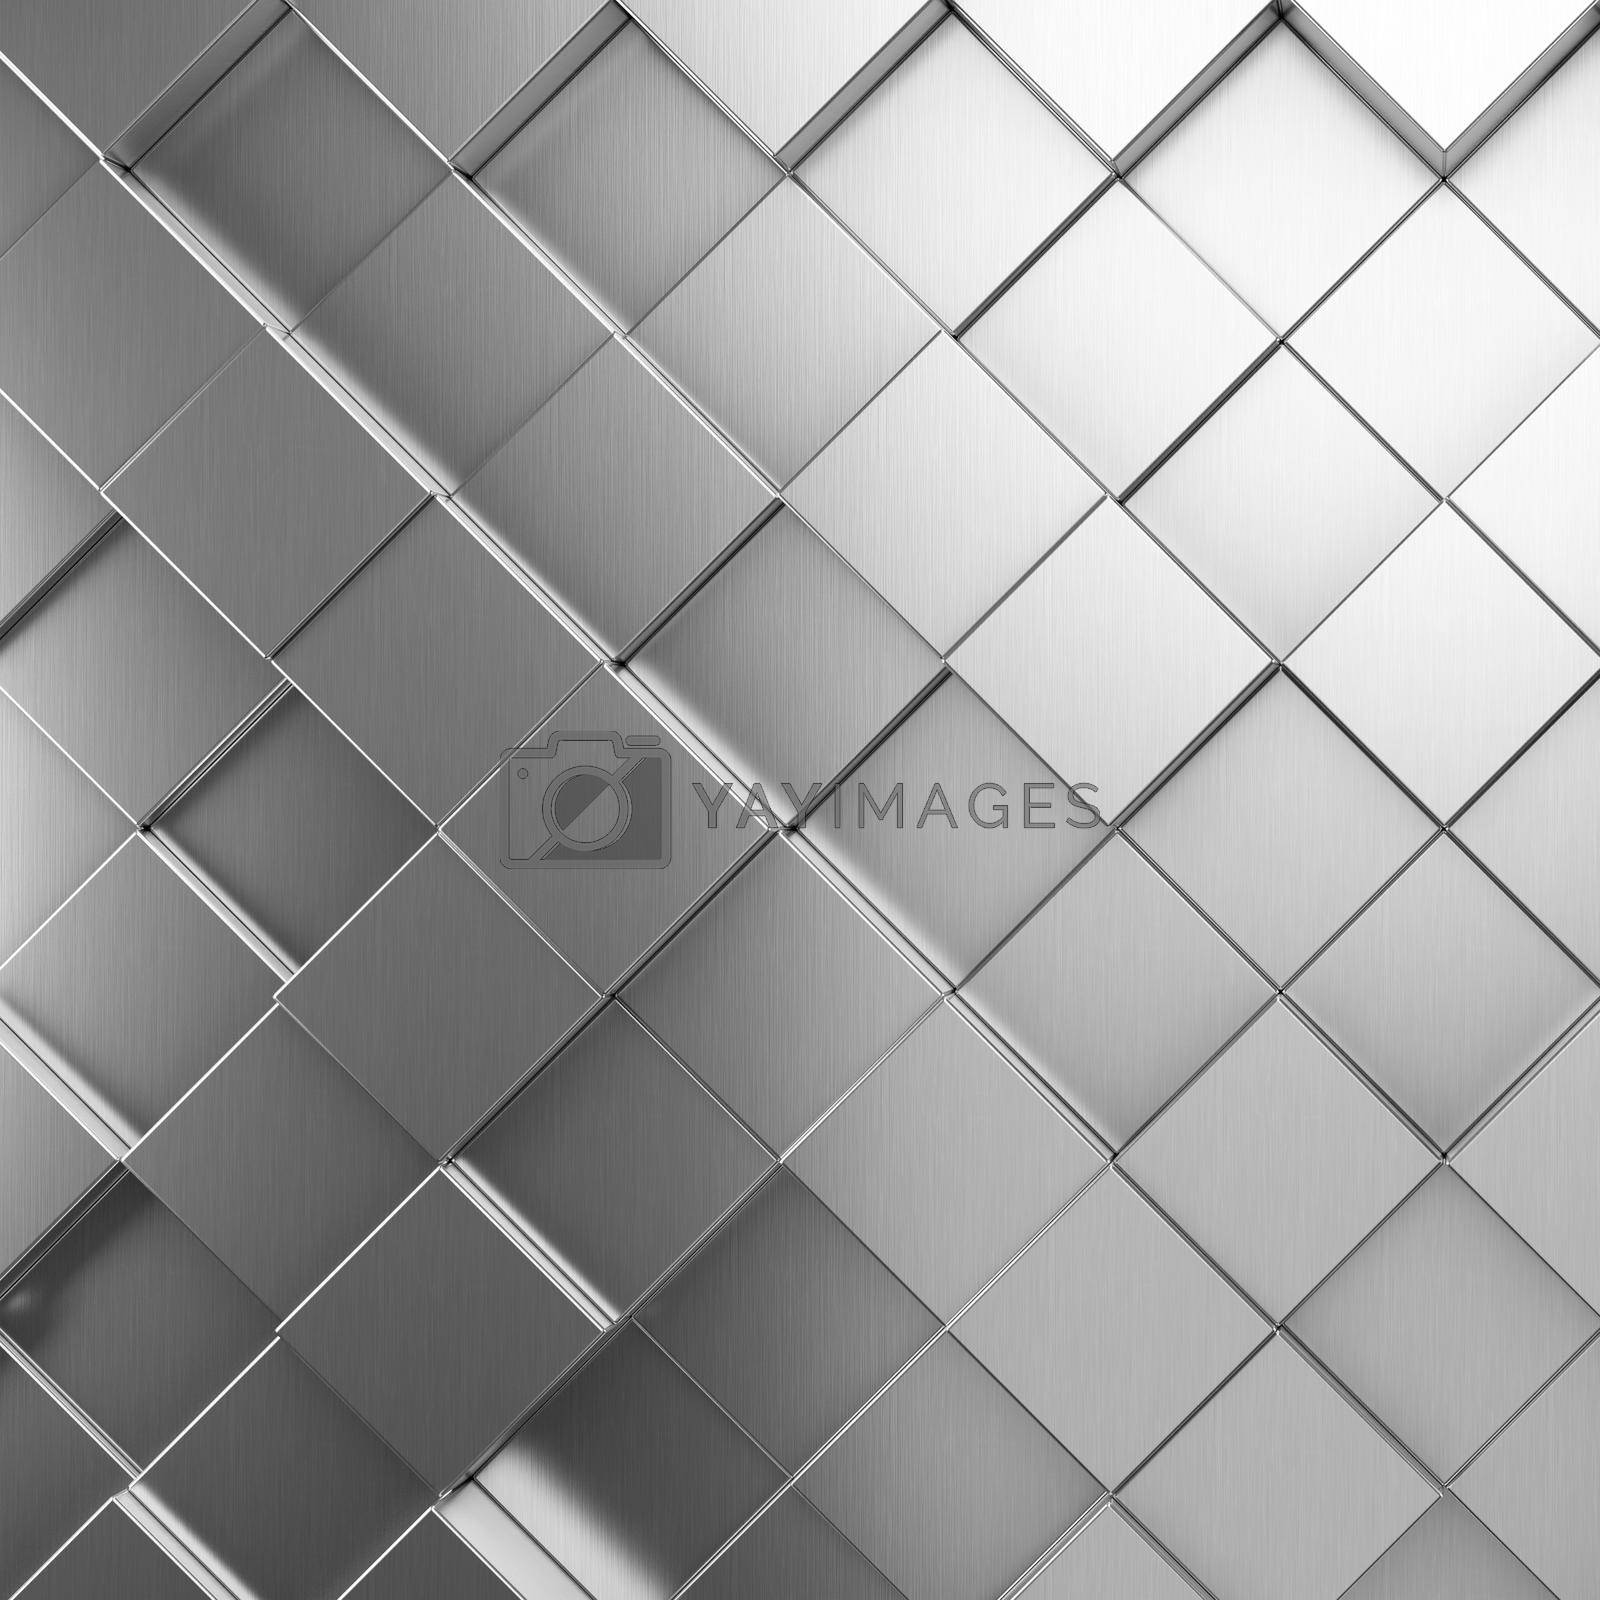 Royalty free image of Futuristic and technological hexagonal background. 3d rendering by Taut